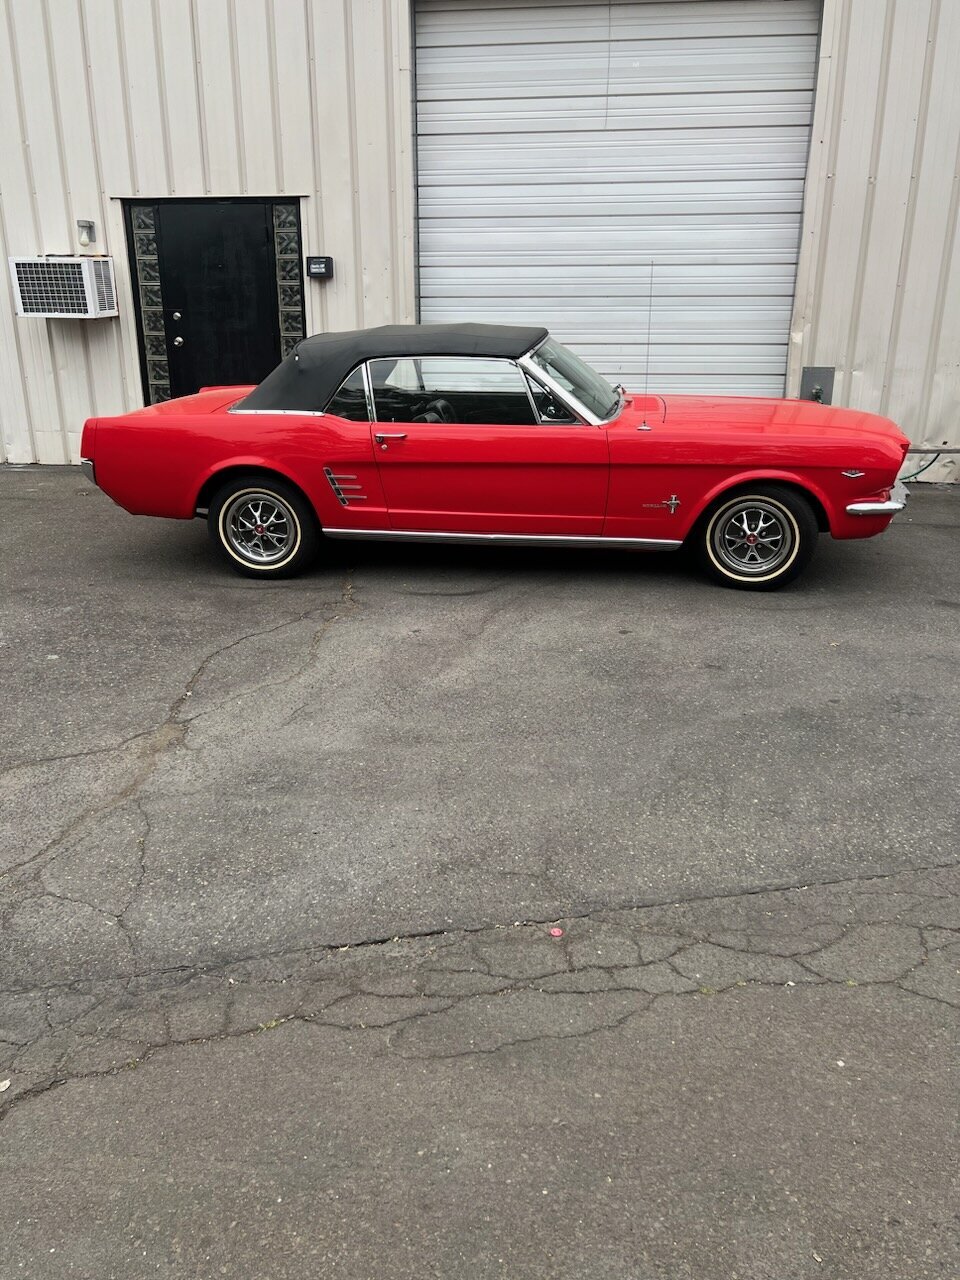 a-nice-touch-auto-detailing-paint-correction-red-mustang-classic-north-haven-ct